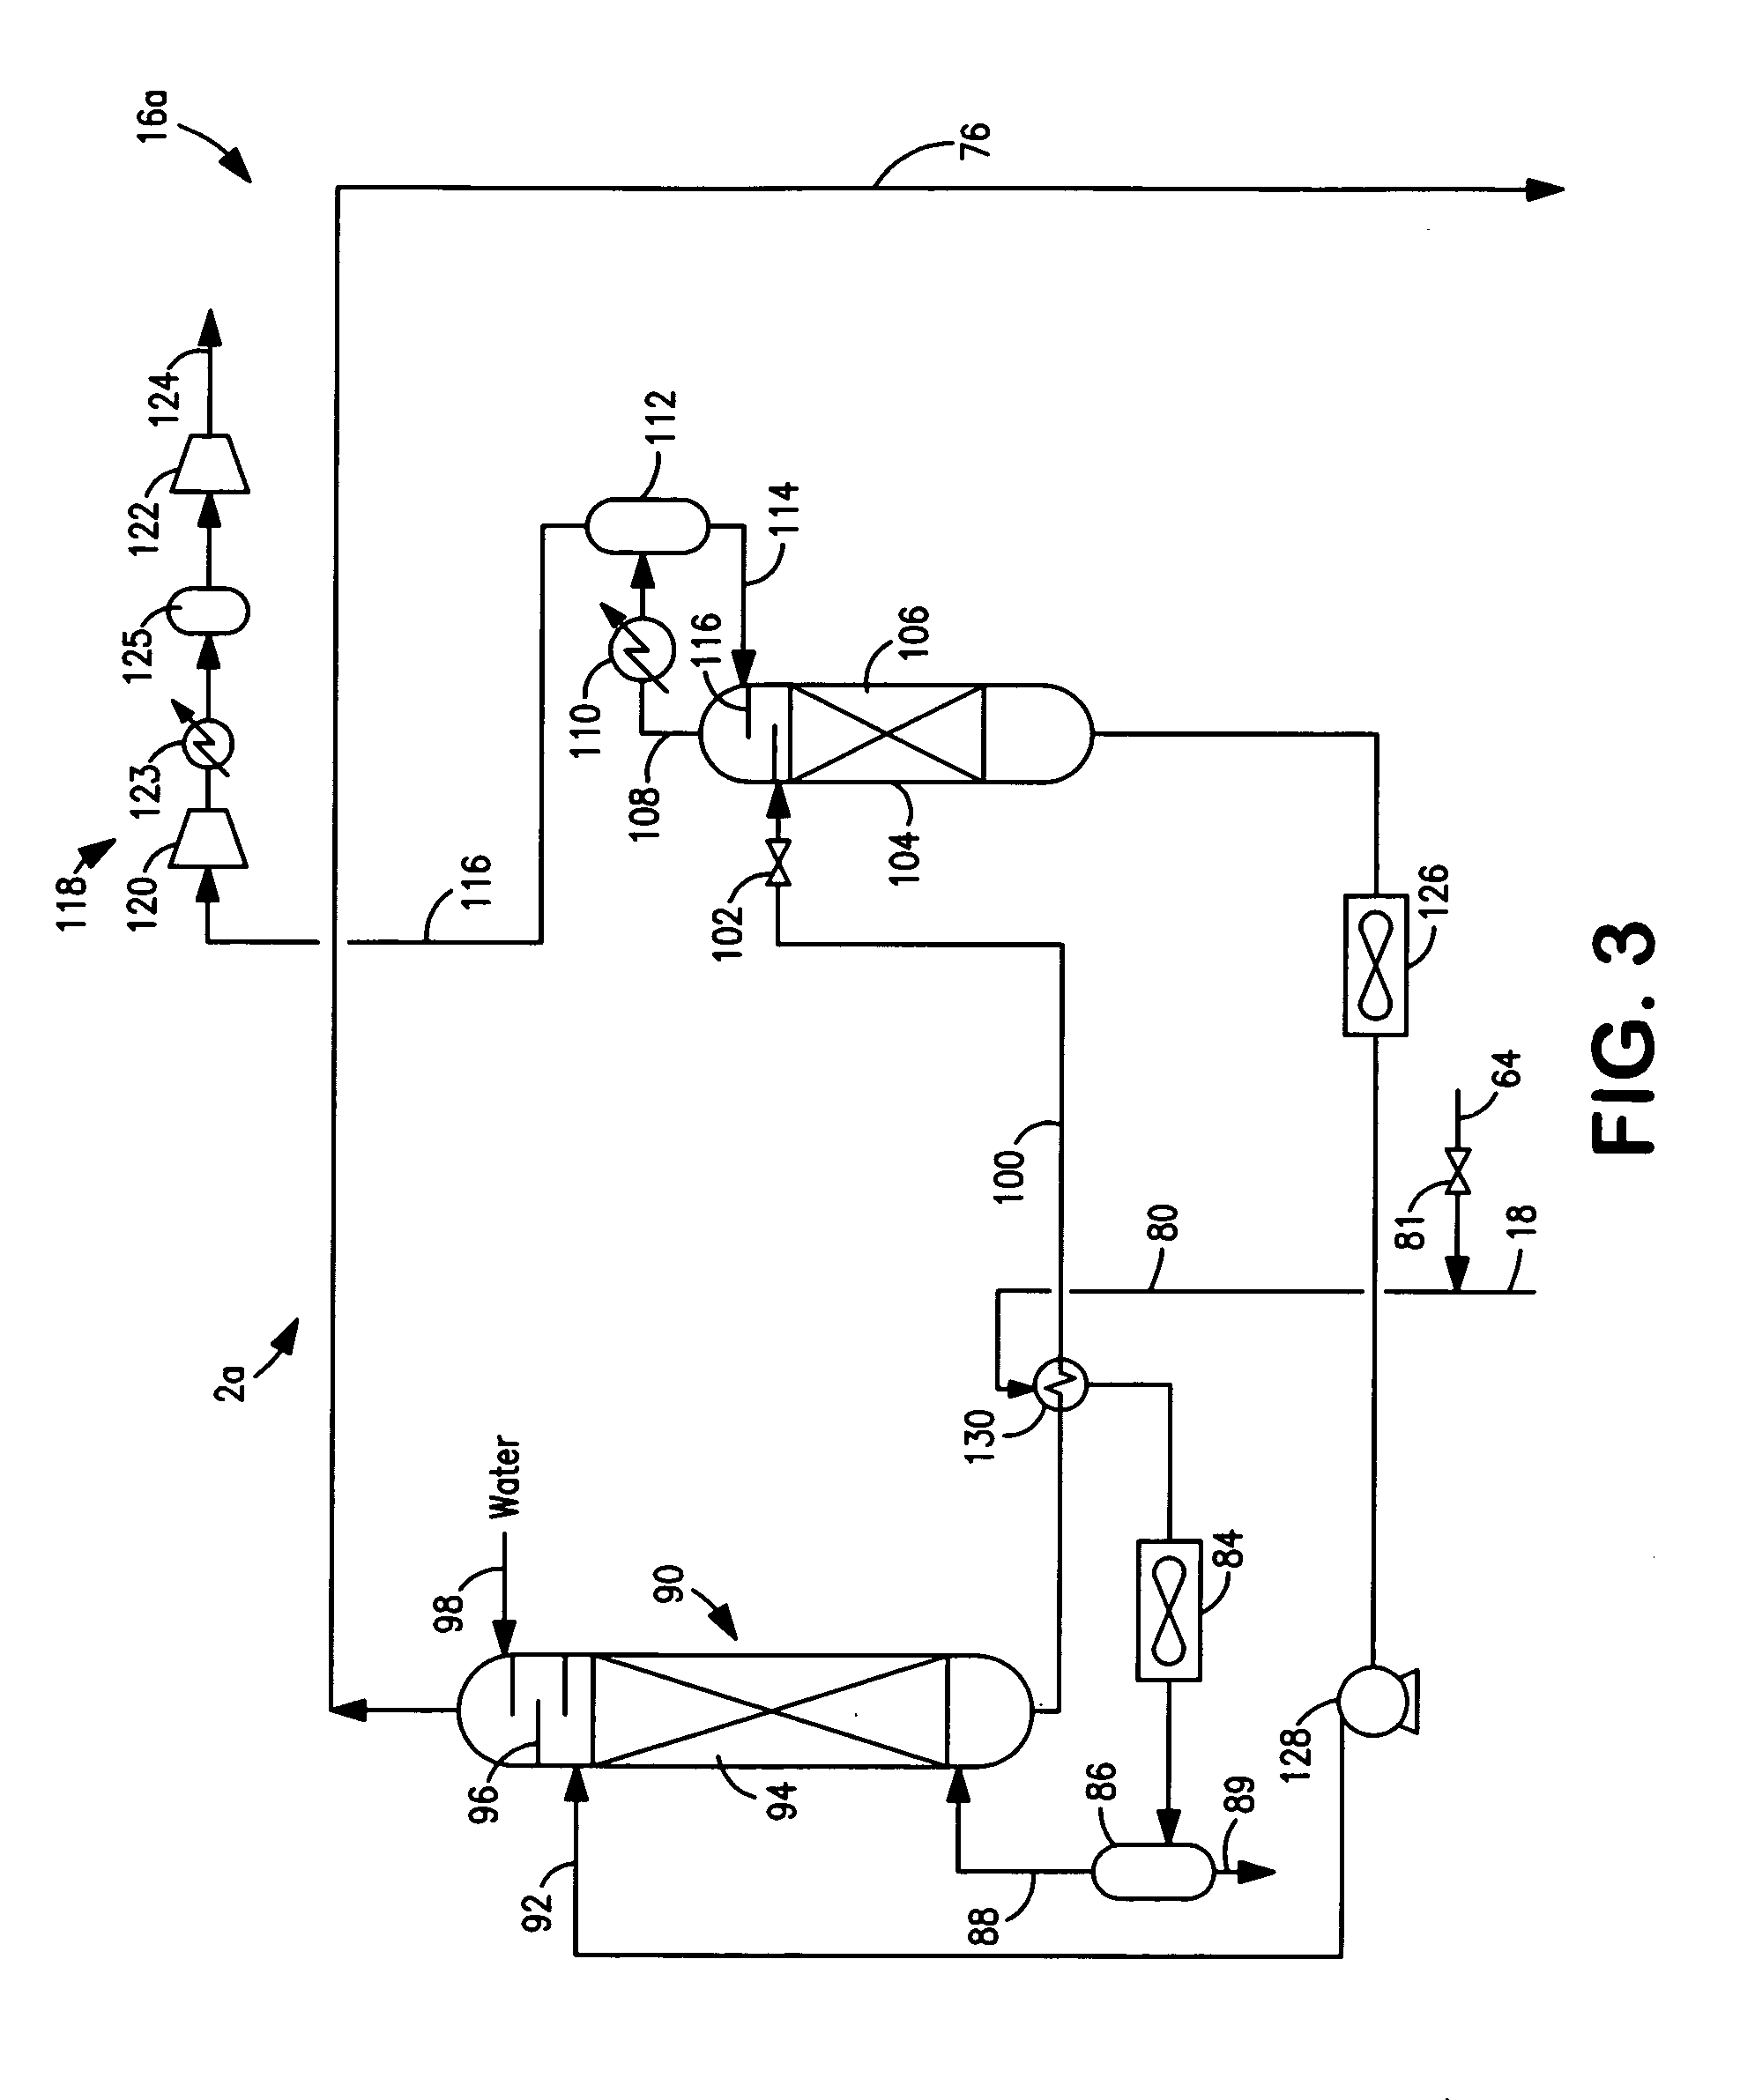 Method of recovering carbon dioxide from a synthesis gas stream